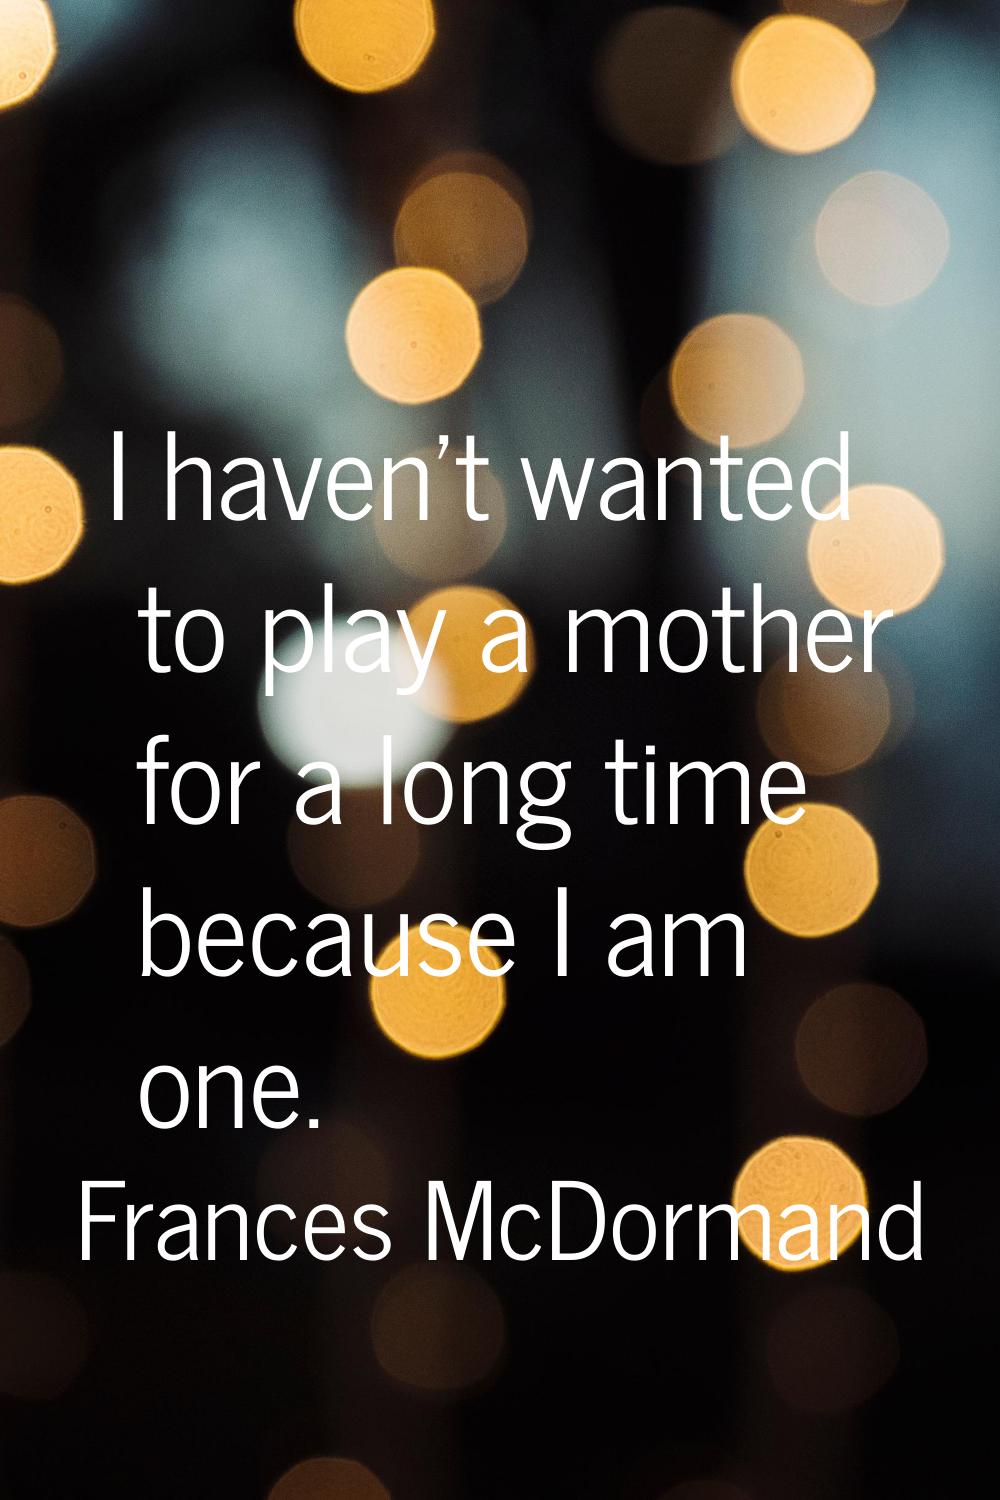 I haven't wanted to play a mother for a long time because I am one.